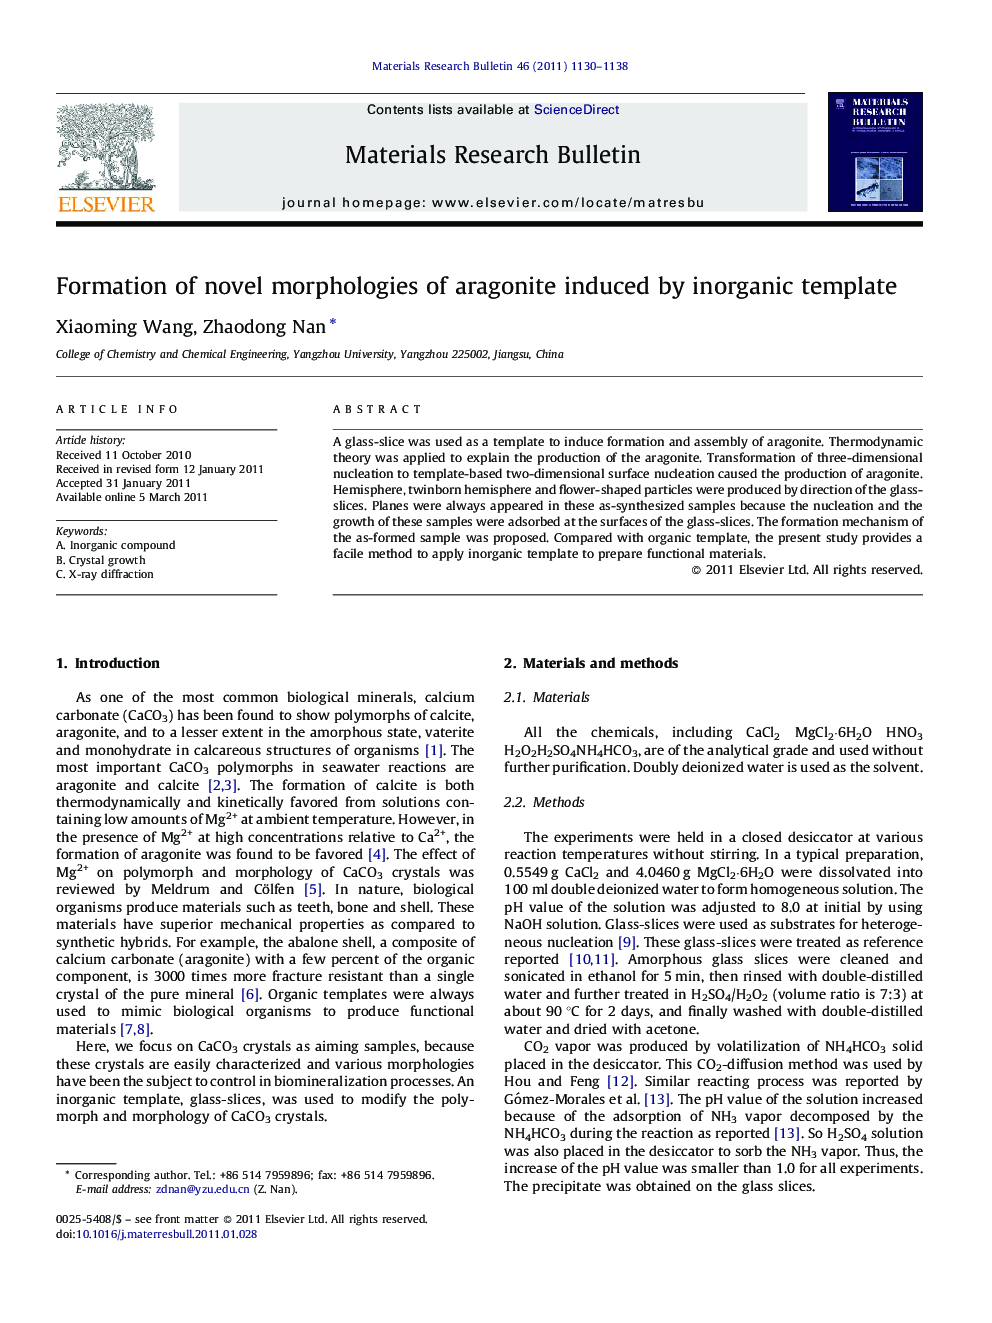 Formation of novel morphologies of aragonite induced by inorganic template